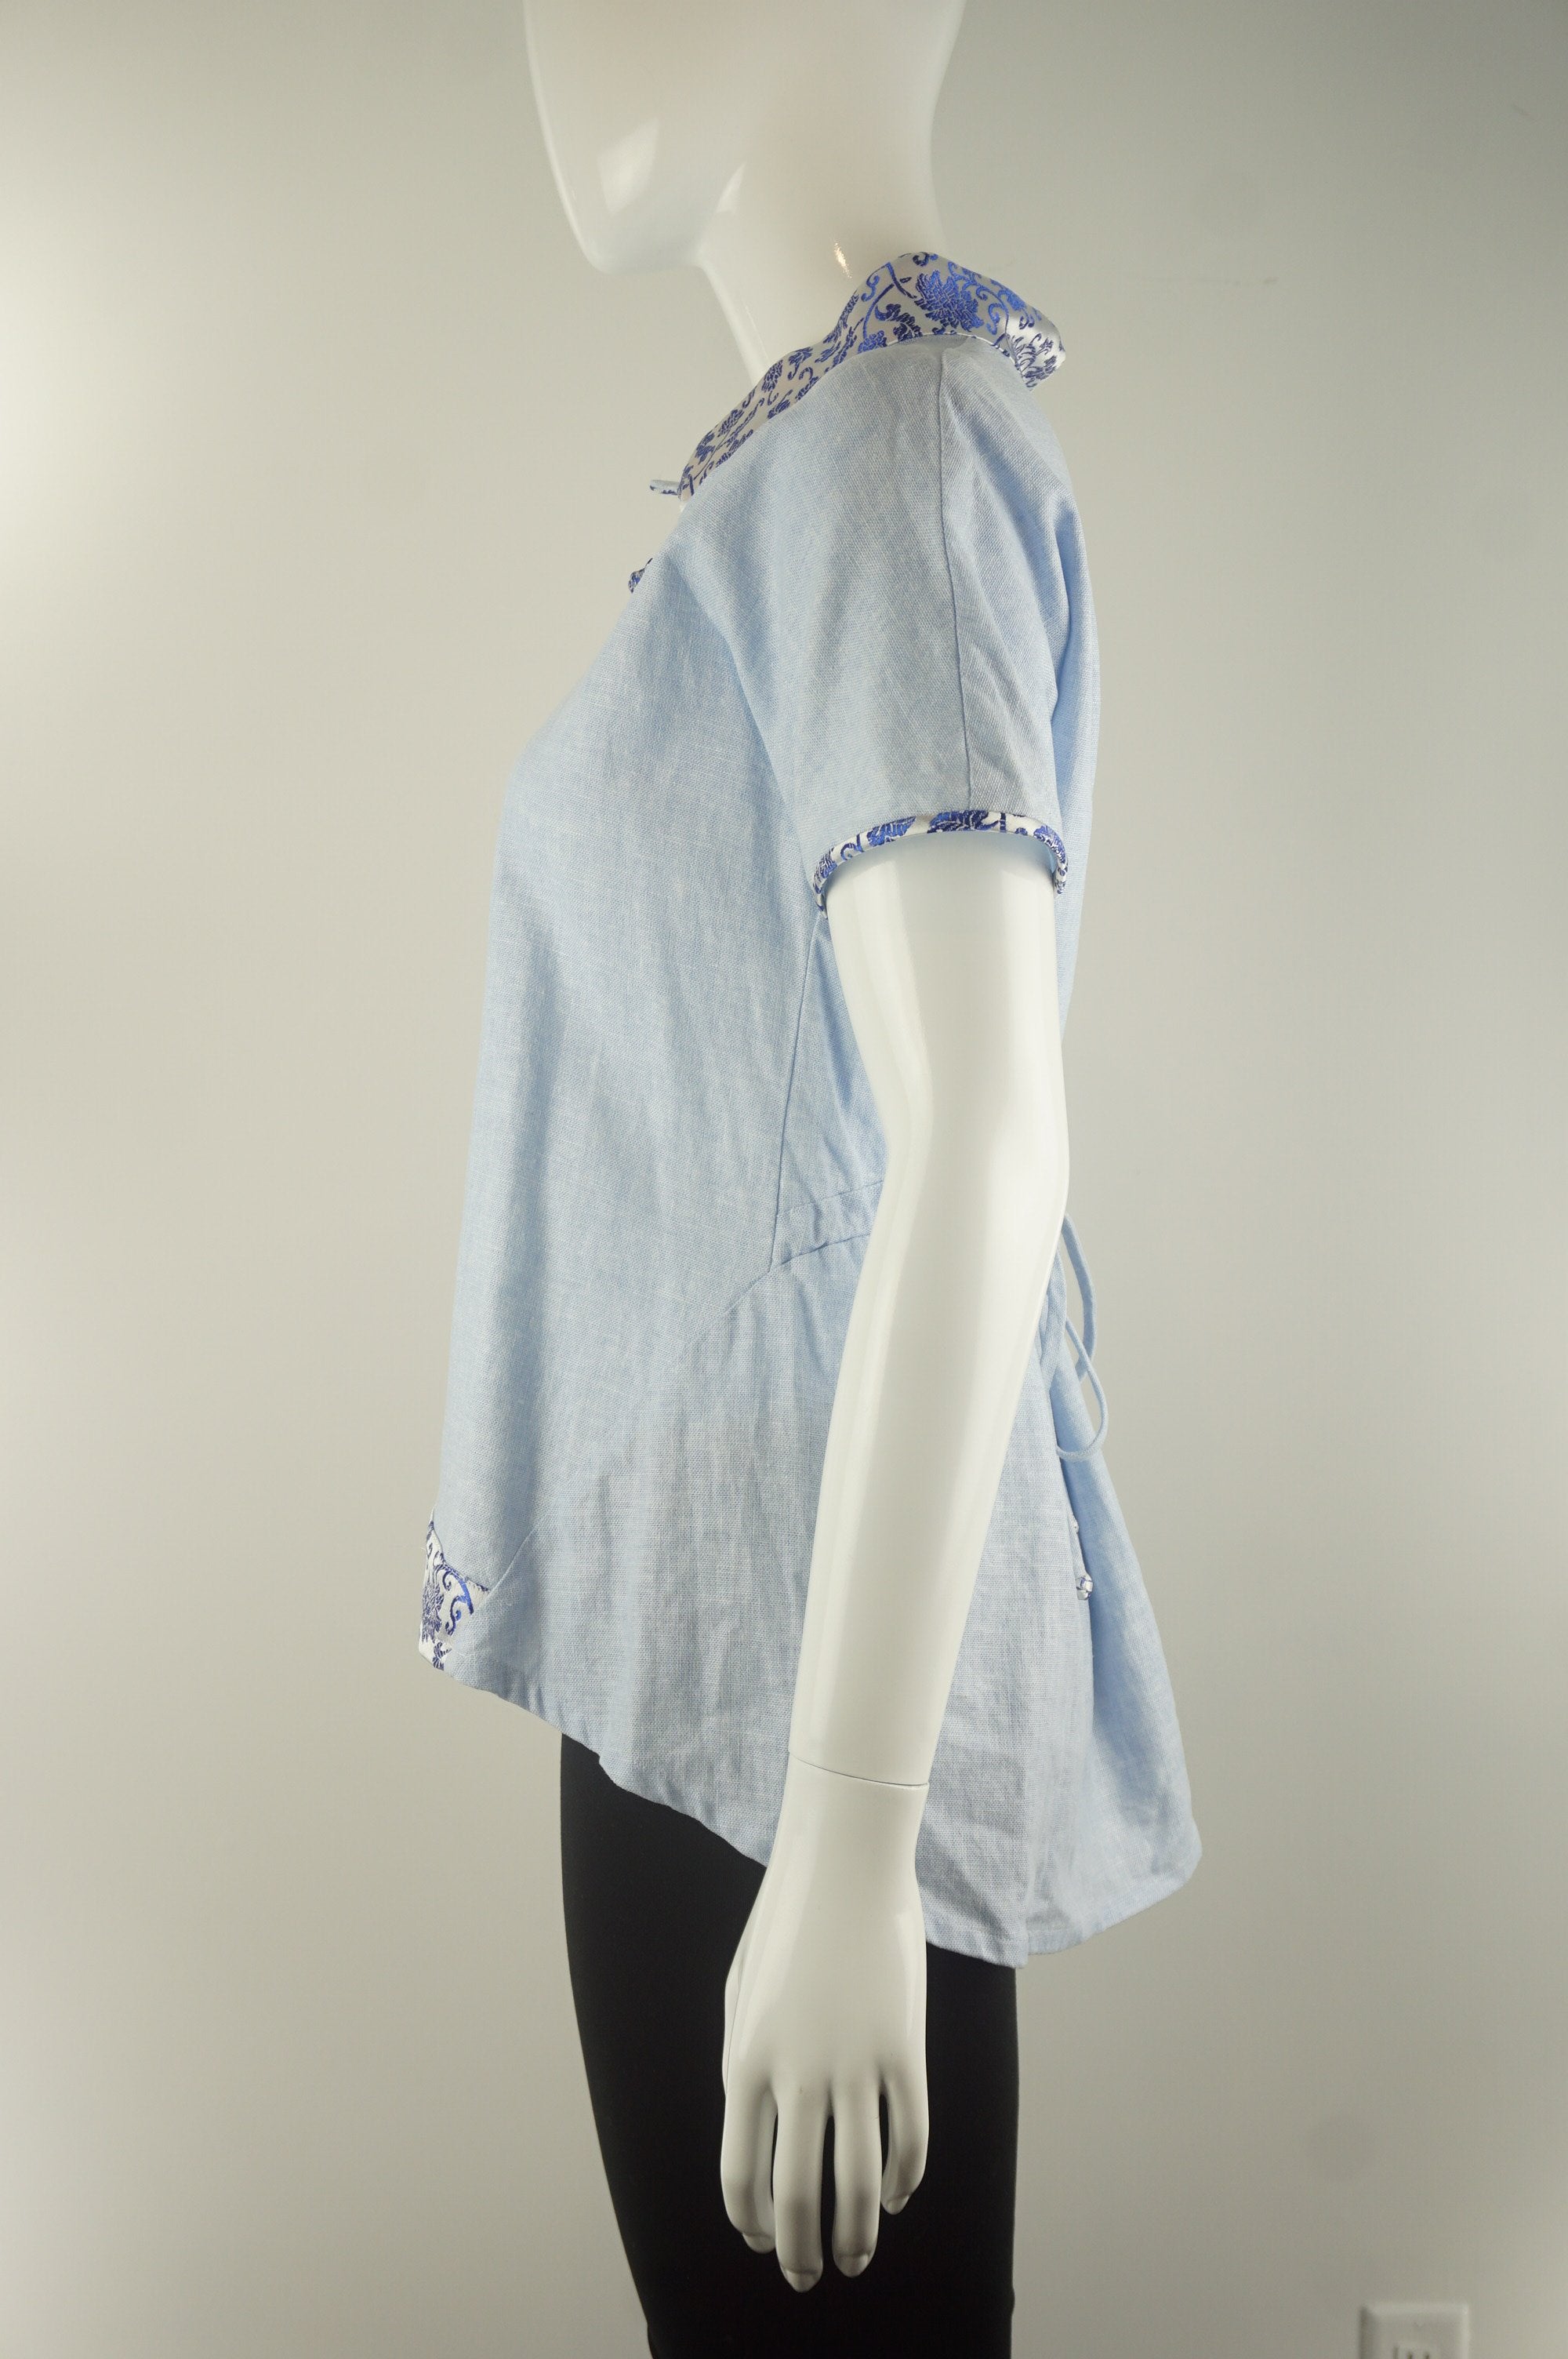 Elli Share Traditional Chinese Style Inspired Top, Unique design featuring traditional Chinese cultural elements but creative modern design. One of a kind grab., Blue, White, Linen, women's Tops, women's Blue, White Tops, Elli Share women's Tops, elegant top, traditional Chinese style top maderin collar, linen shirt, comfortable qibao inspired linen shirt